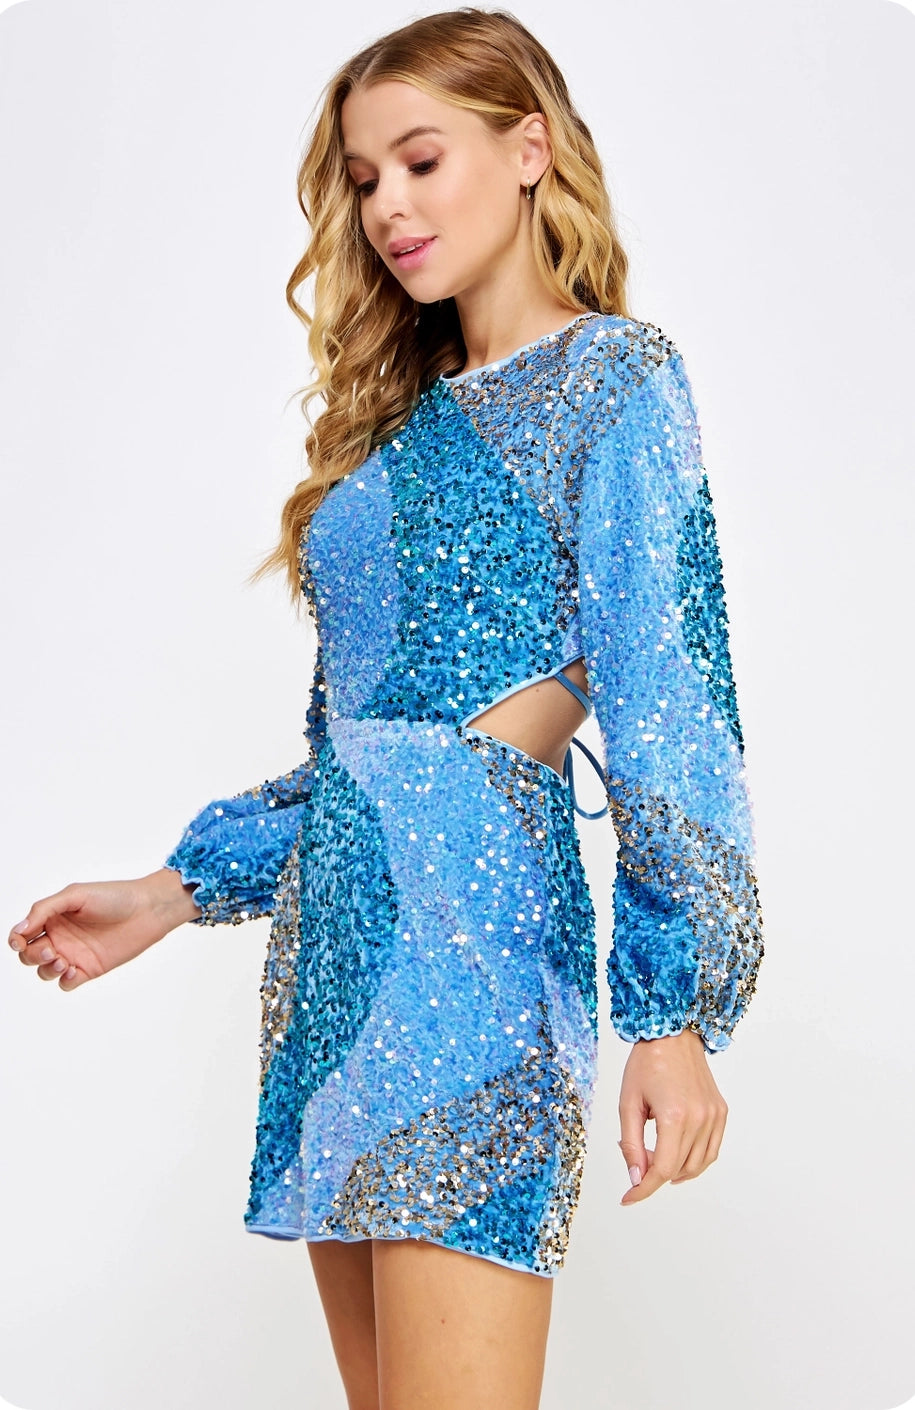 The Stage Sequins Mini Dress